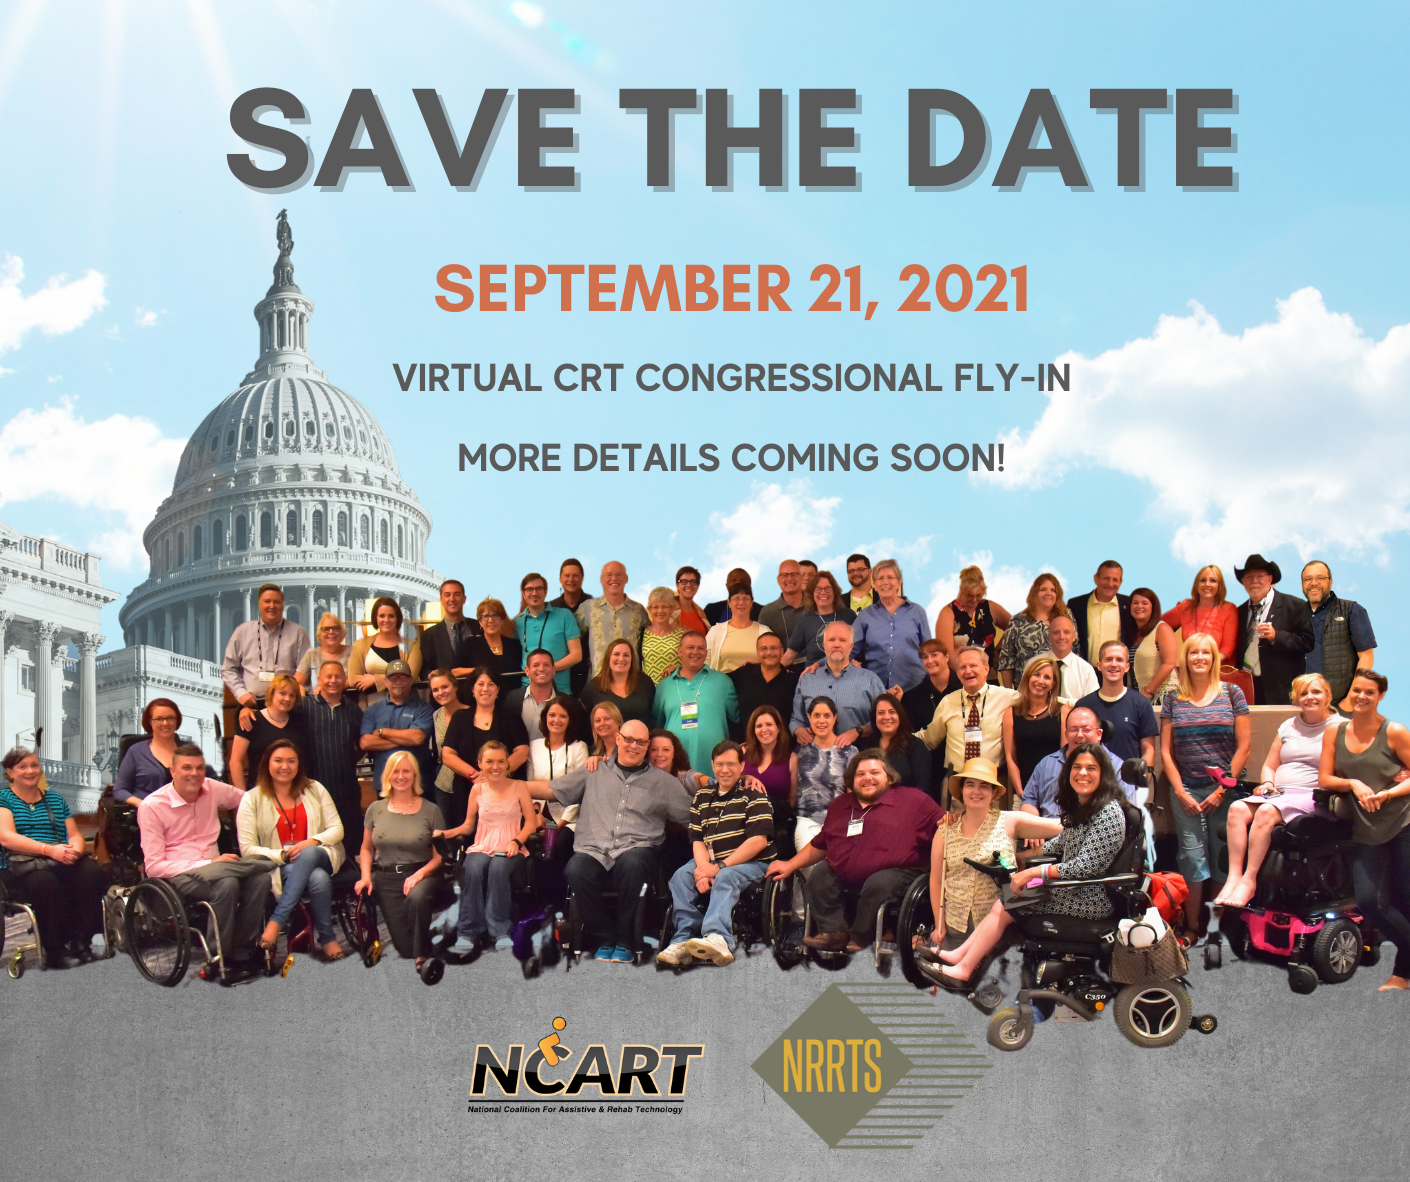 September 21 Virtual CRT Congressional Fly-In Announced